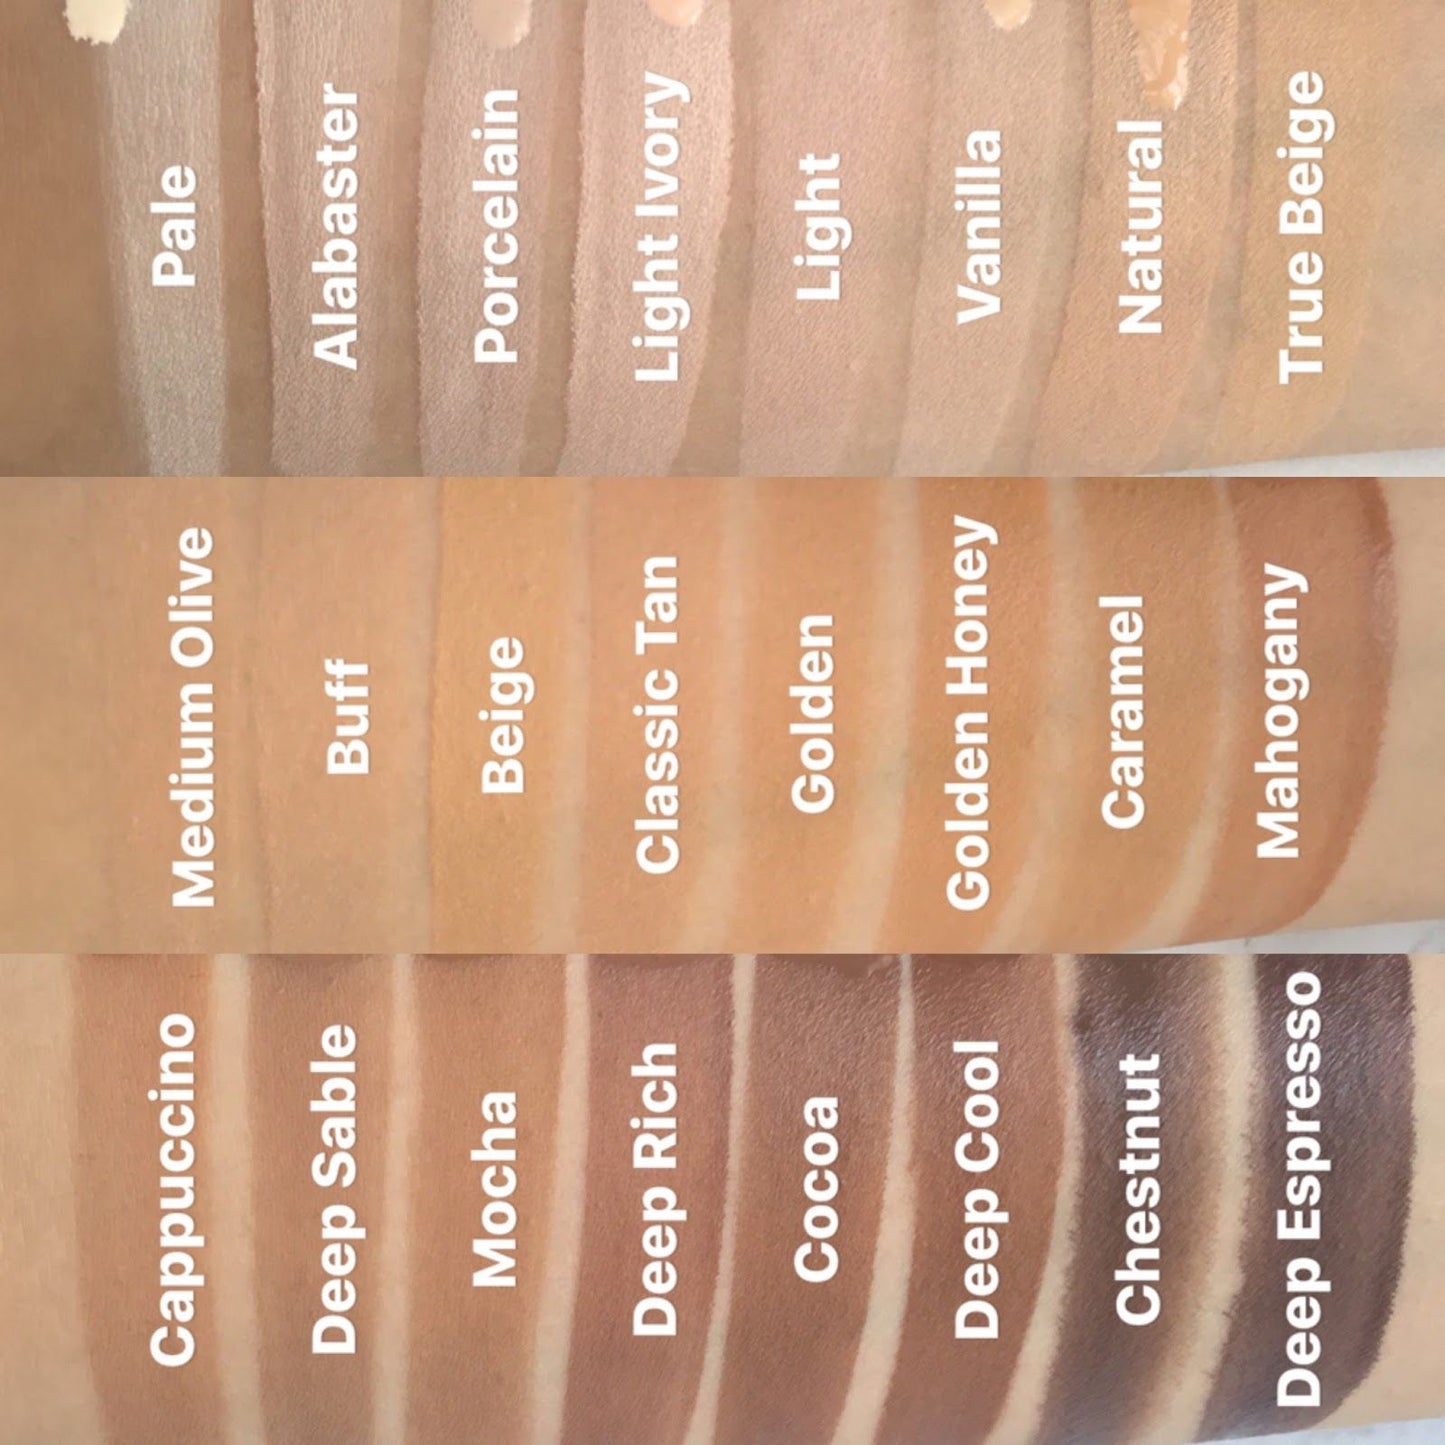 Nyx Total Control Foundation